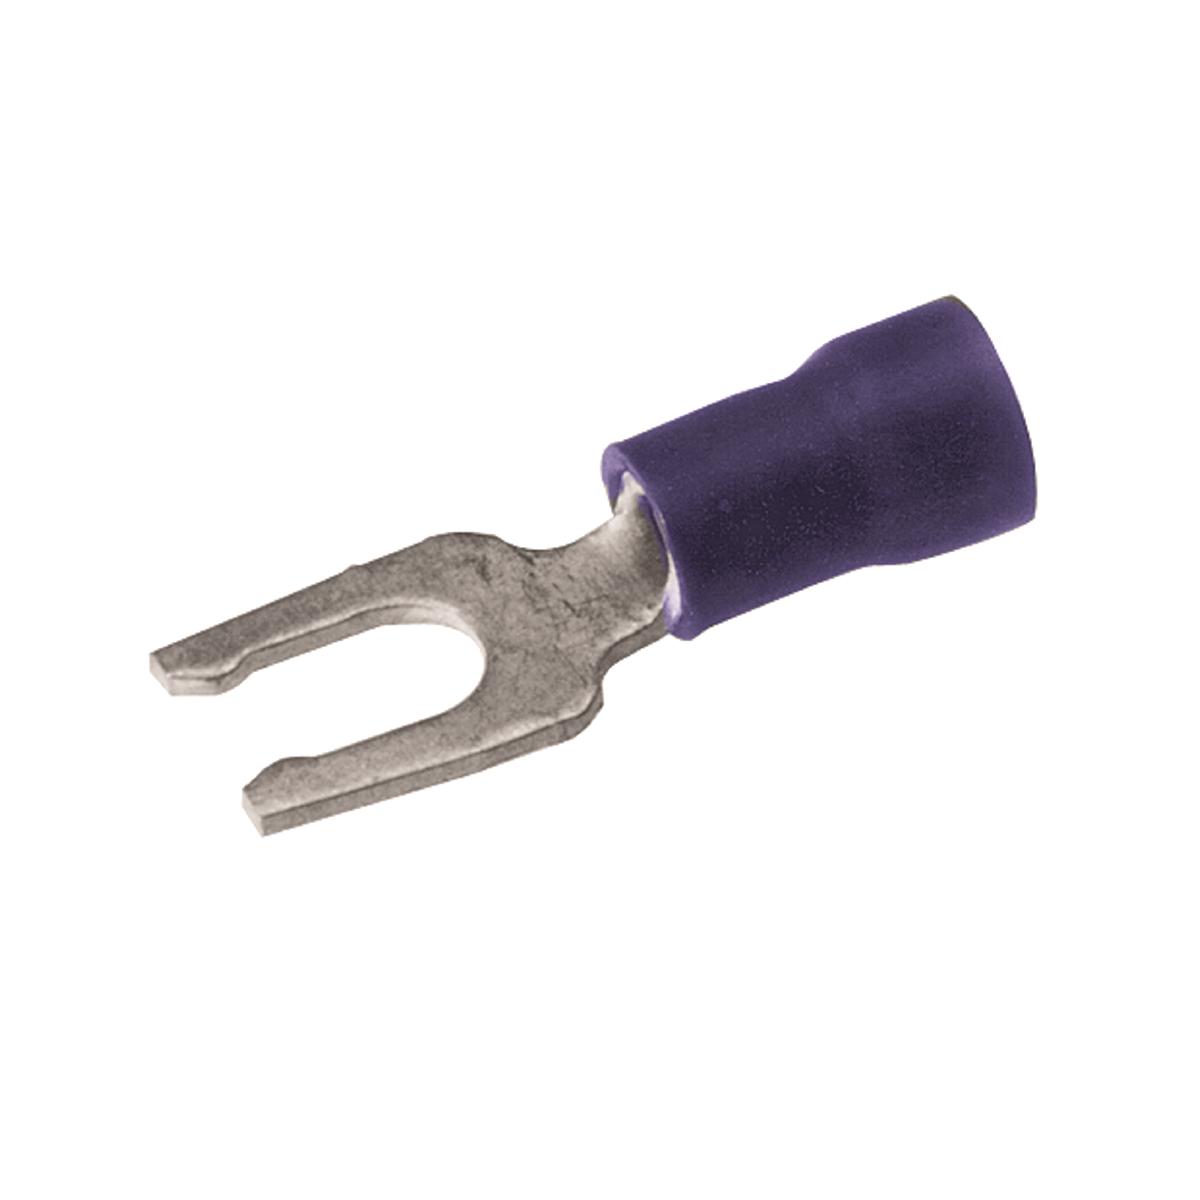 Hubbell BA14EL6 Copper Terminal, Locking Fork Tongue, 16-14 AWG, #4-#6 Stud, Vinyl Insulated.  ; Features: Locking Fork Tongue Design: Allows Fast Installation-Screw Only Has To Be Loosened For Termination, Internal Configuration Of The Fork: Prevents The Terminal From C